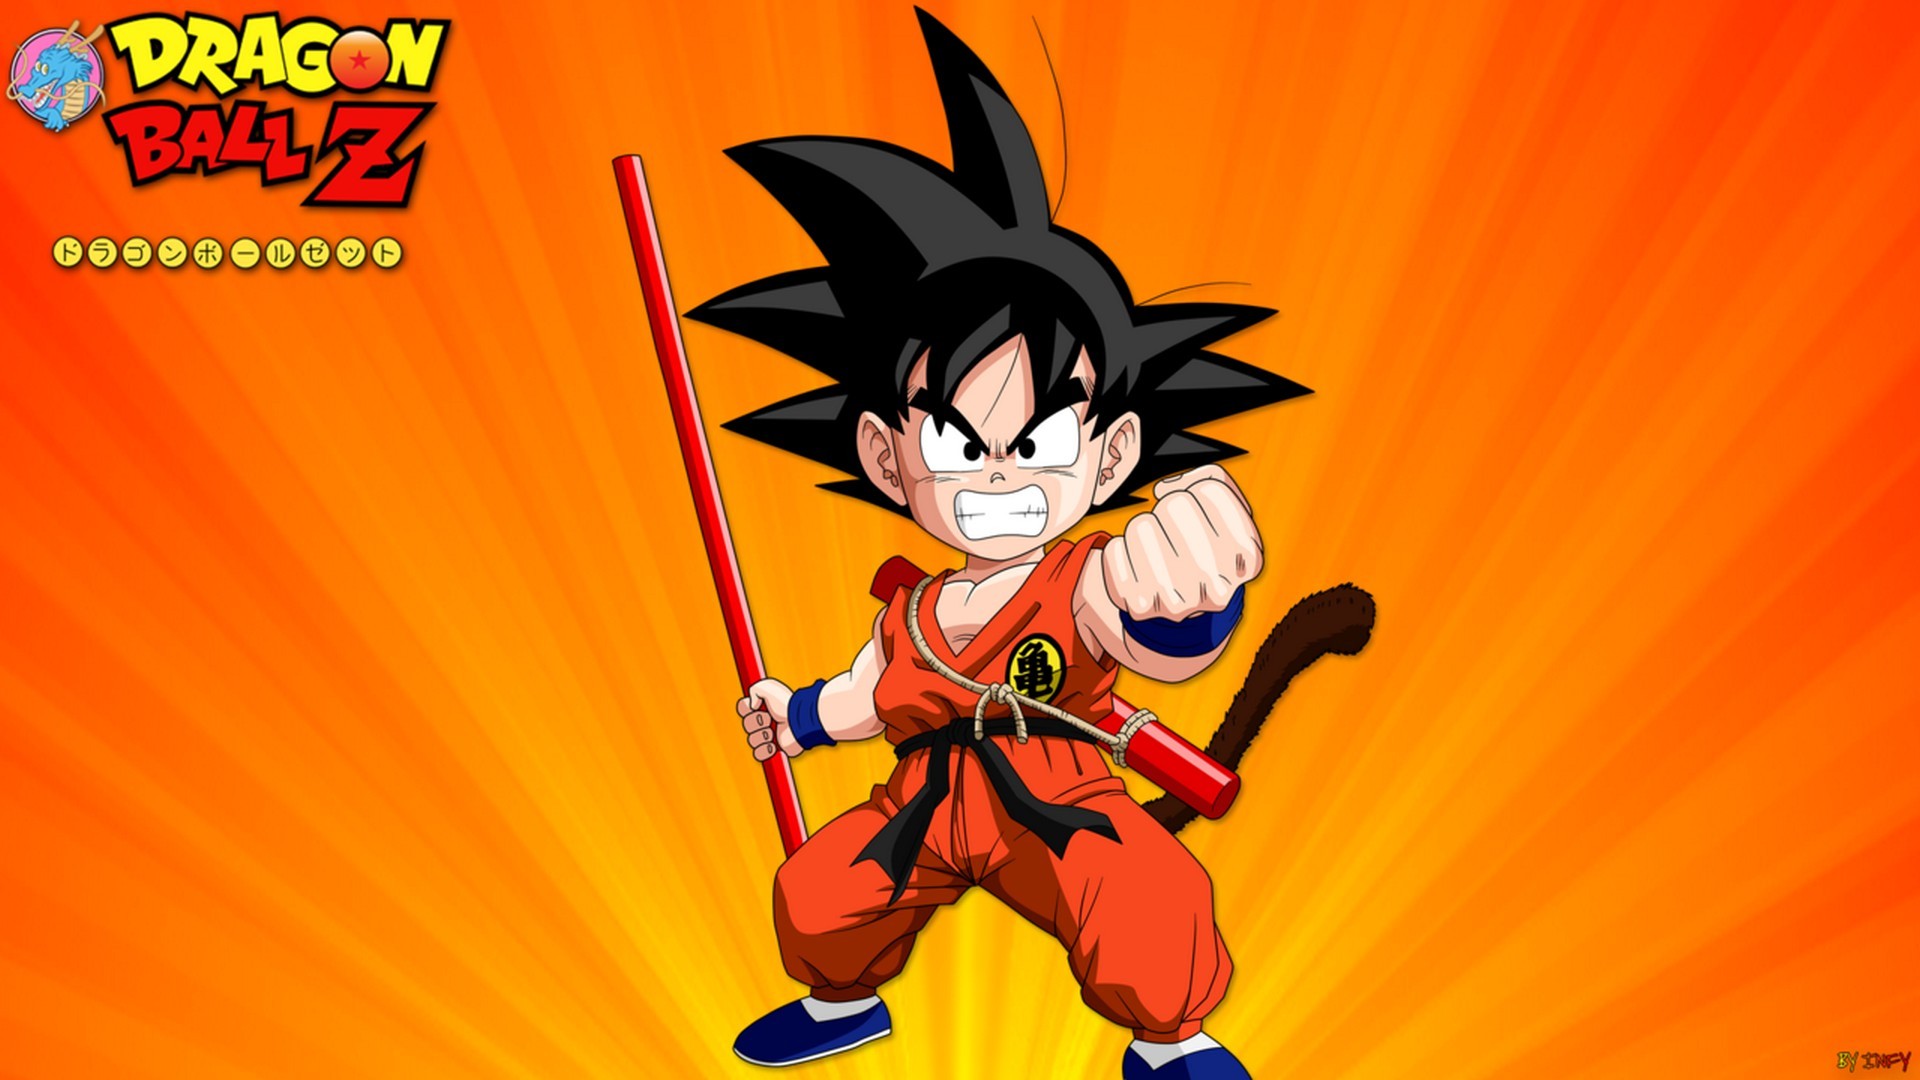 Kid Goku Desktop Backgrounds HD with image resolution 1920x1080 pixel. You can use this wallpaper as background for your desktop Computer Screensavers, Android or iPhone smartphones